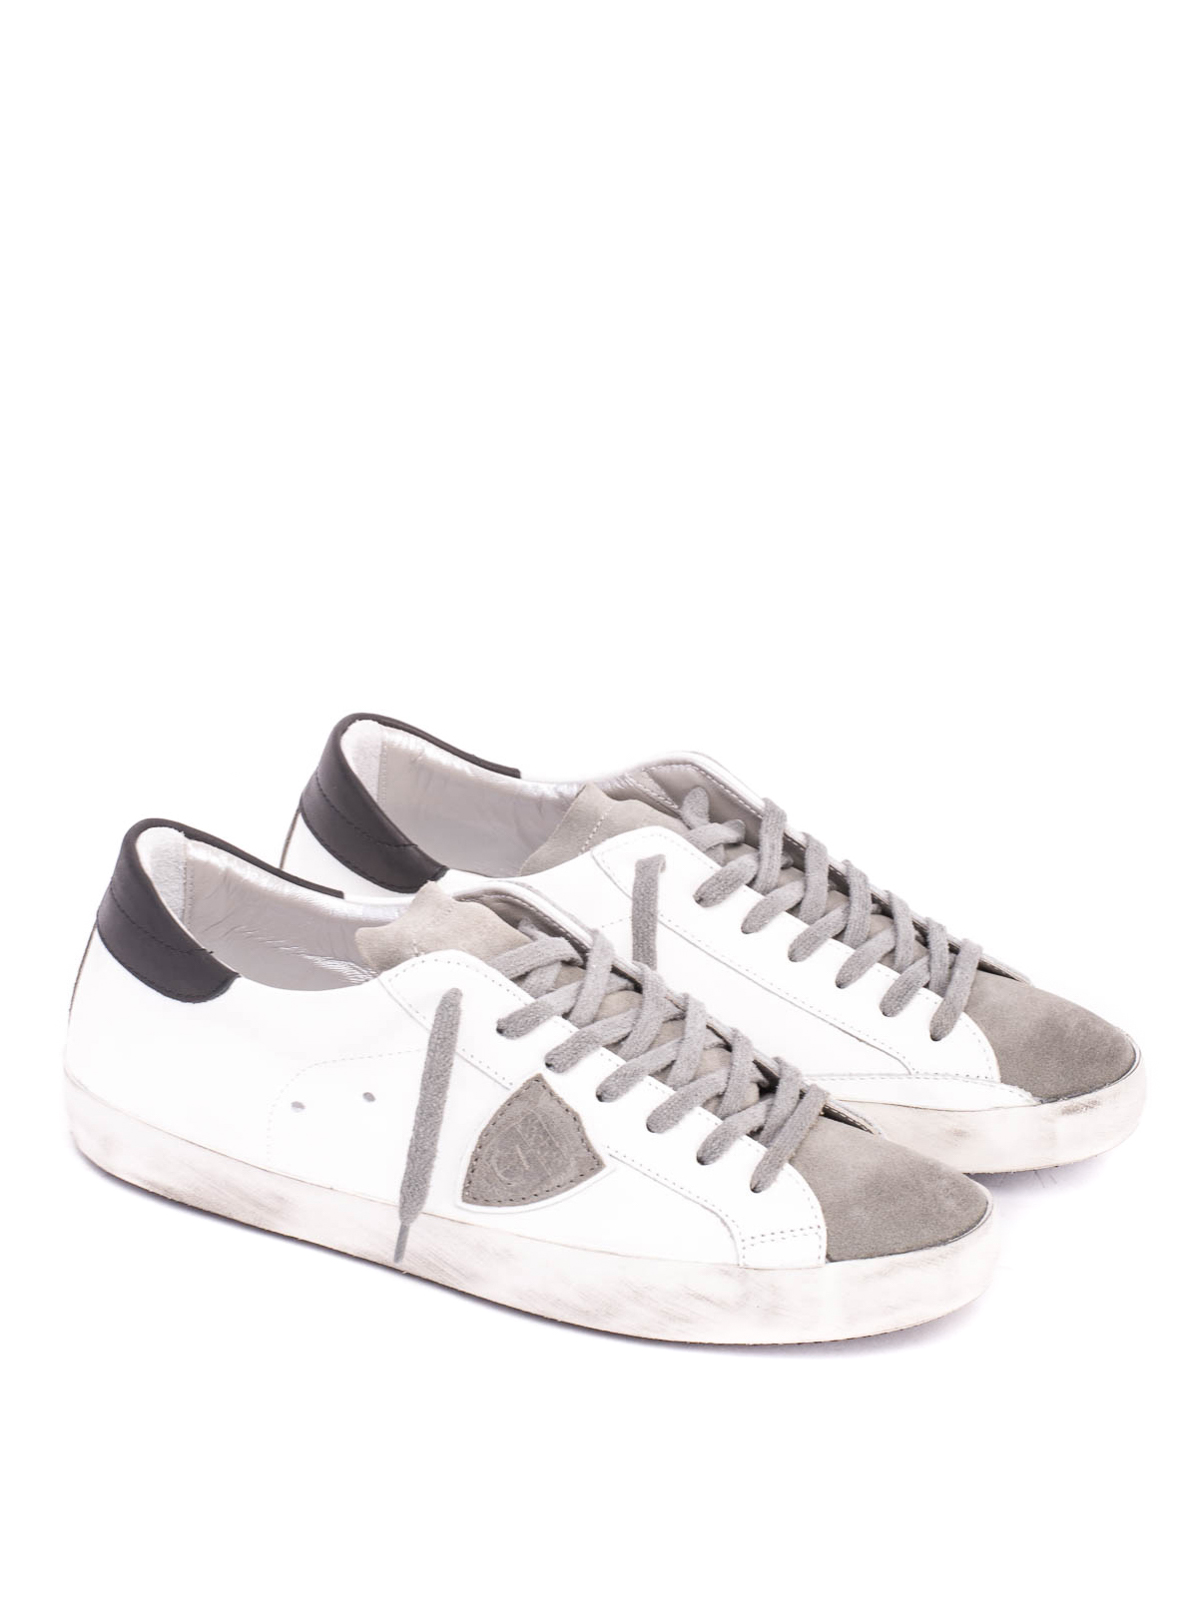 Trainers Philippe Model - Low-top sneakers - CLLUVX02 | iKRIX.com